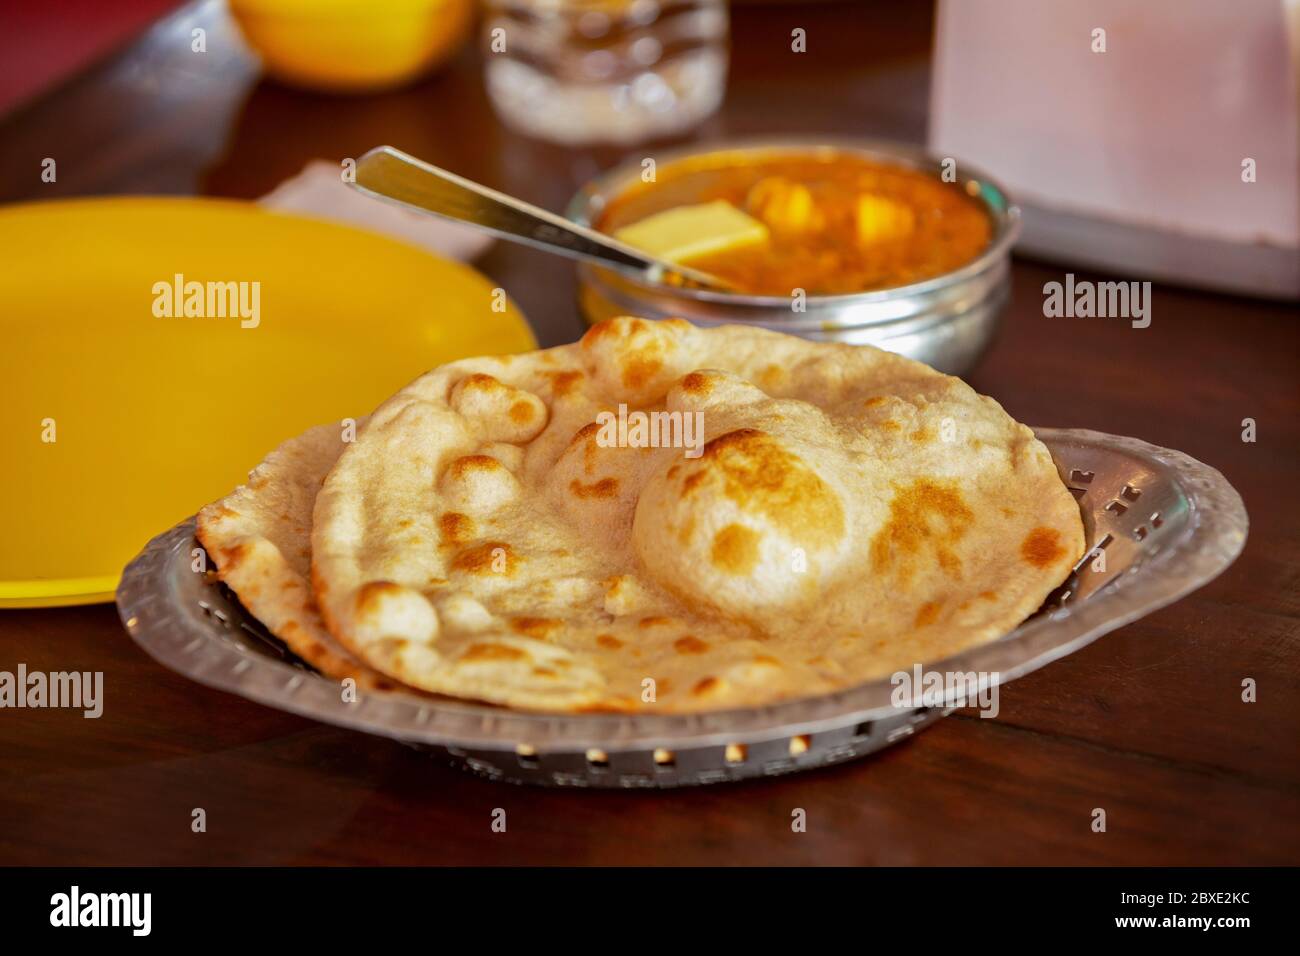 Indian style chapati in a plate on table with a bowl of curry. Stock Photo